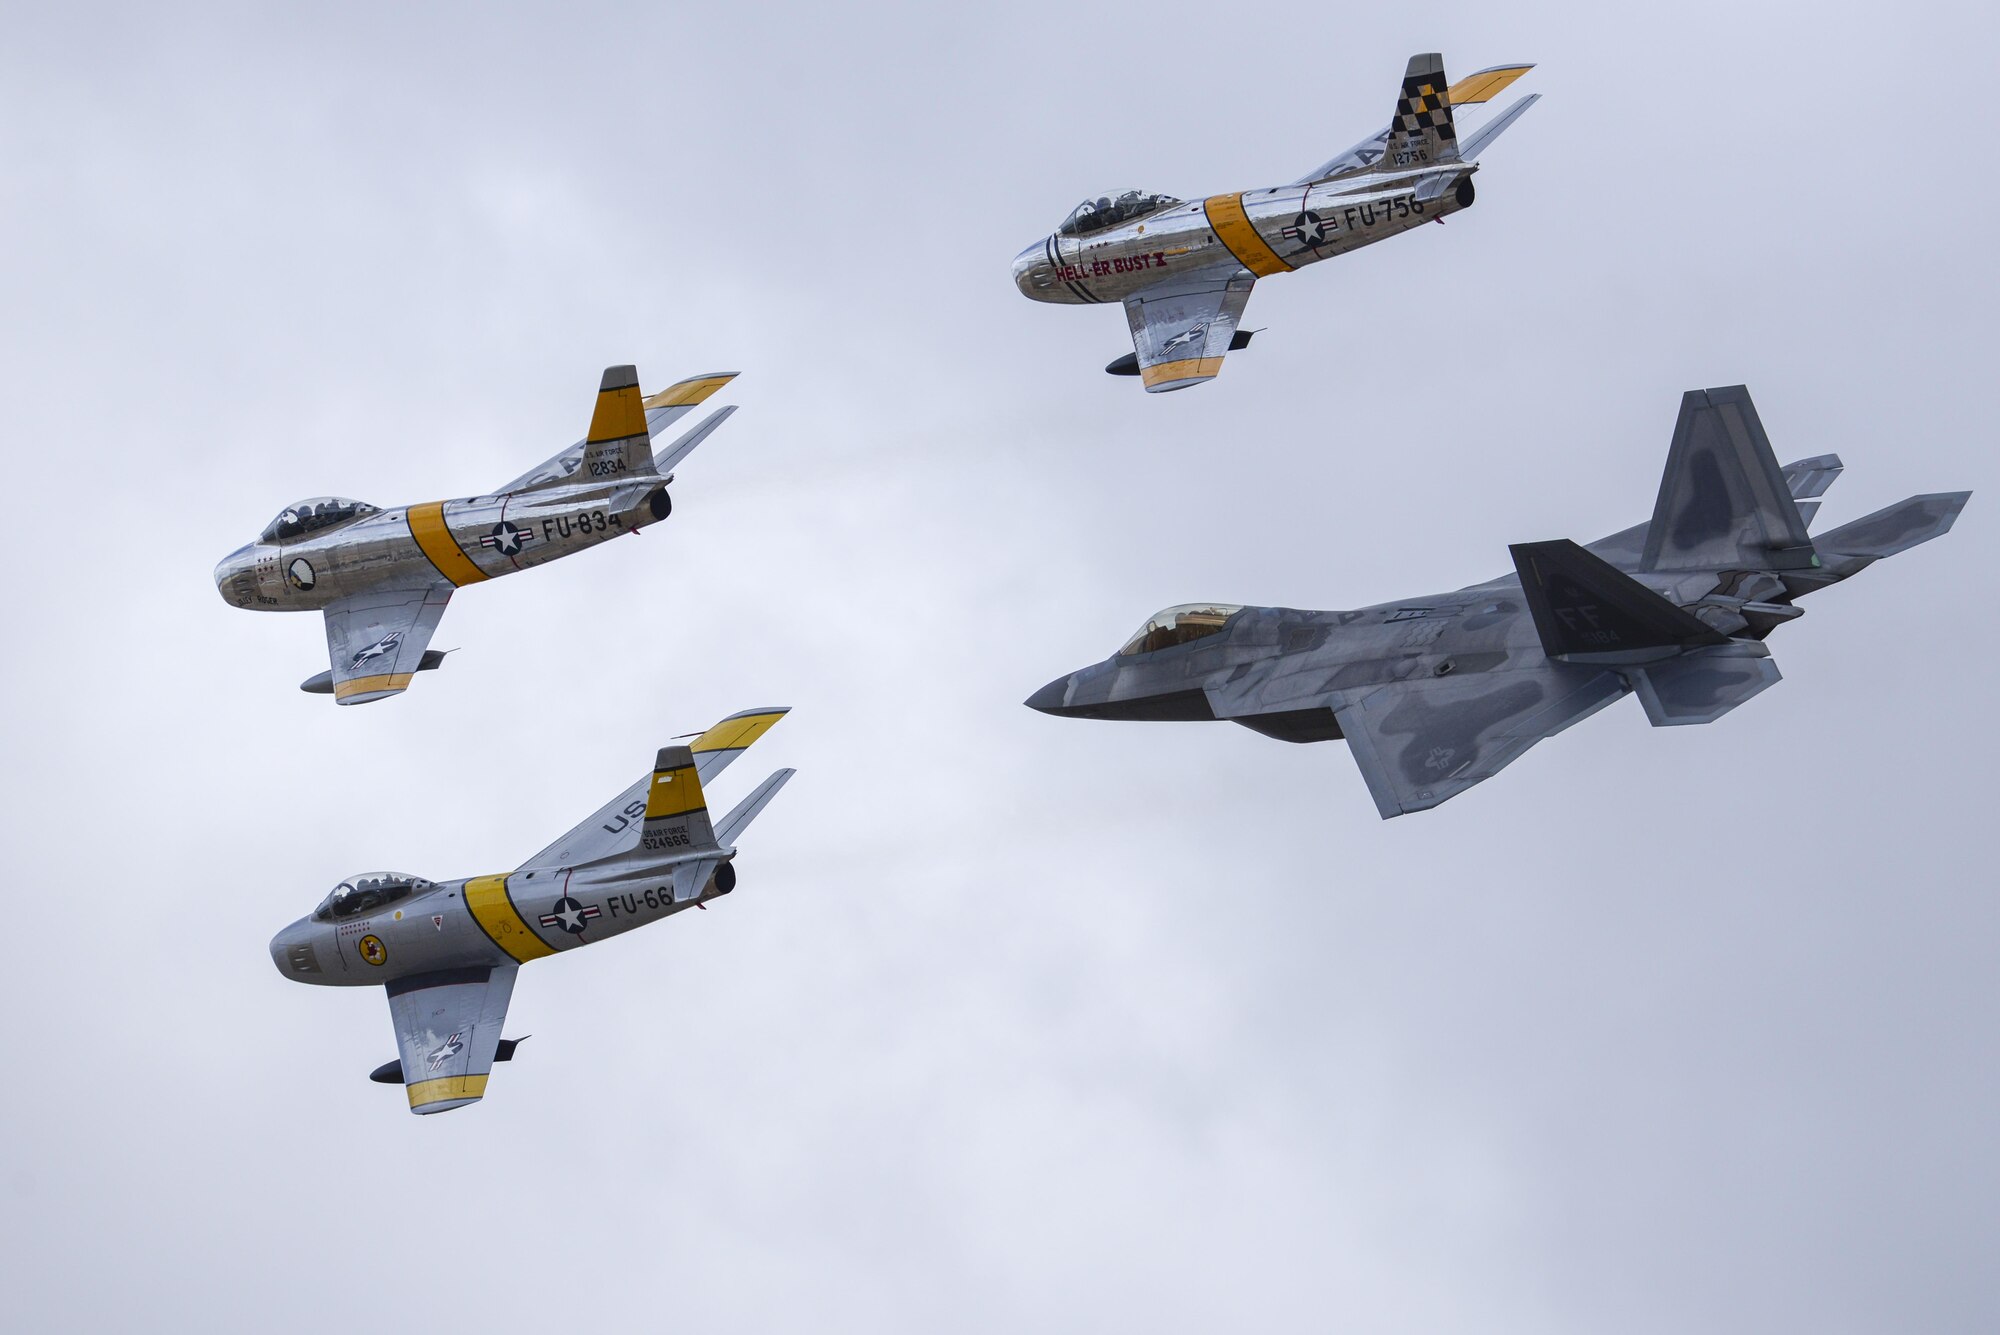 Three F-86 Sabres and a U.S. Air Force F-22 Raptor fly in formation during the 2016 Heritage Flight Training and Certification Course at Davis-Monthan Air Force Base, Ariz., March 6, 2016. Established in 1997, the HFTCC certifies civilian pilots of historic military aircraft and U.S. Air Force pilots to fly in formation together during the upcoming air show season. (U.S. Air Force photo by Senior Airman Chris Massey/Released)